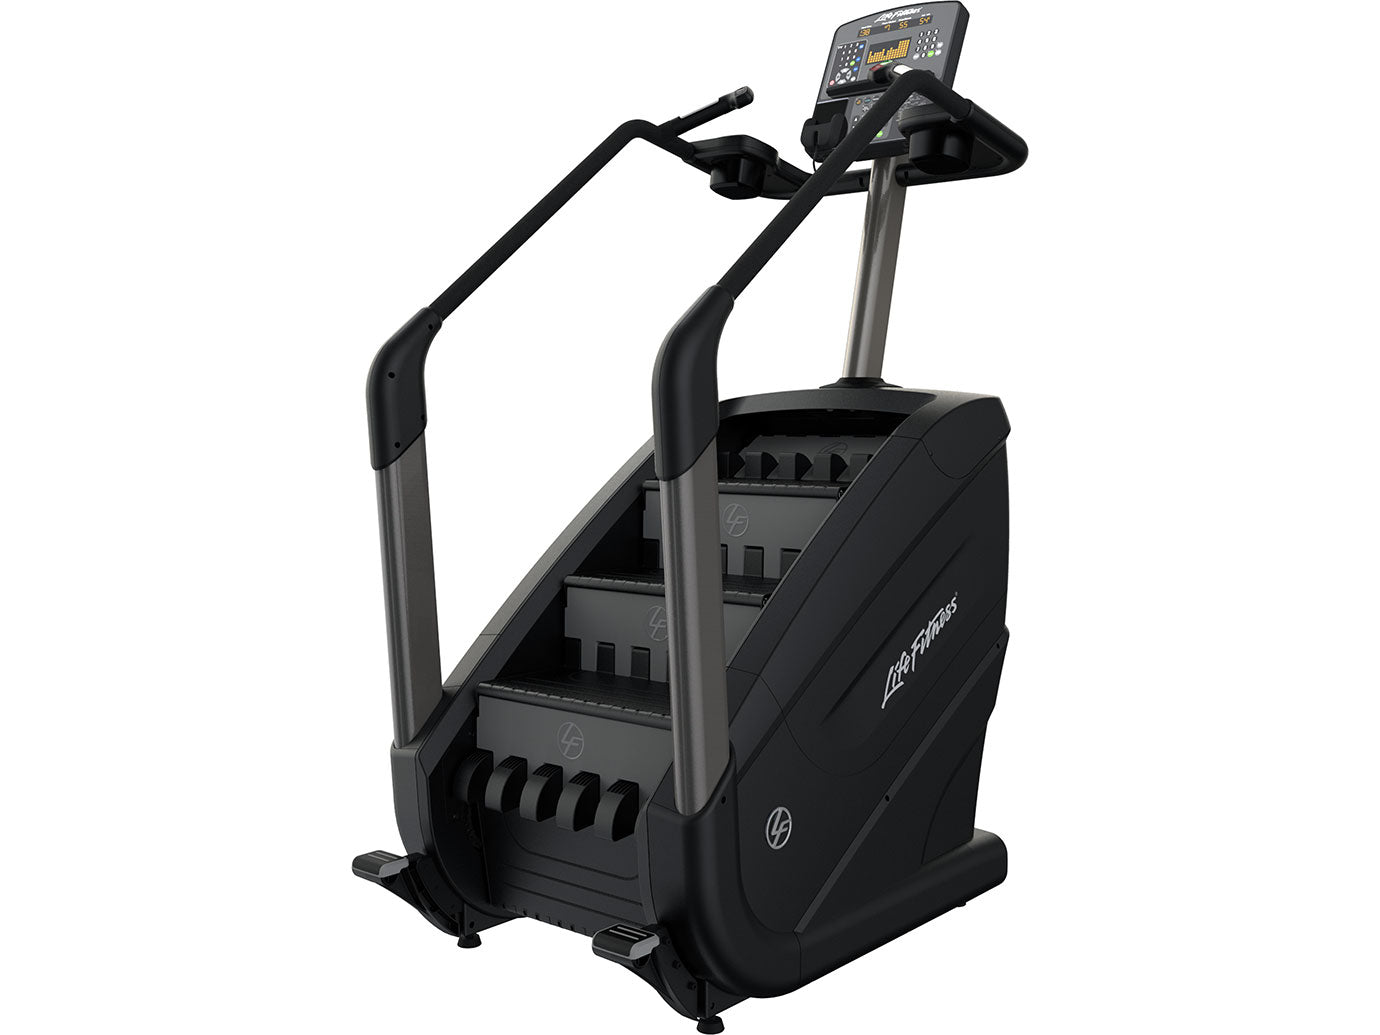 Factory photo of a Refurbished Life Fitness CLPM Integrity Series PowerMill Climber